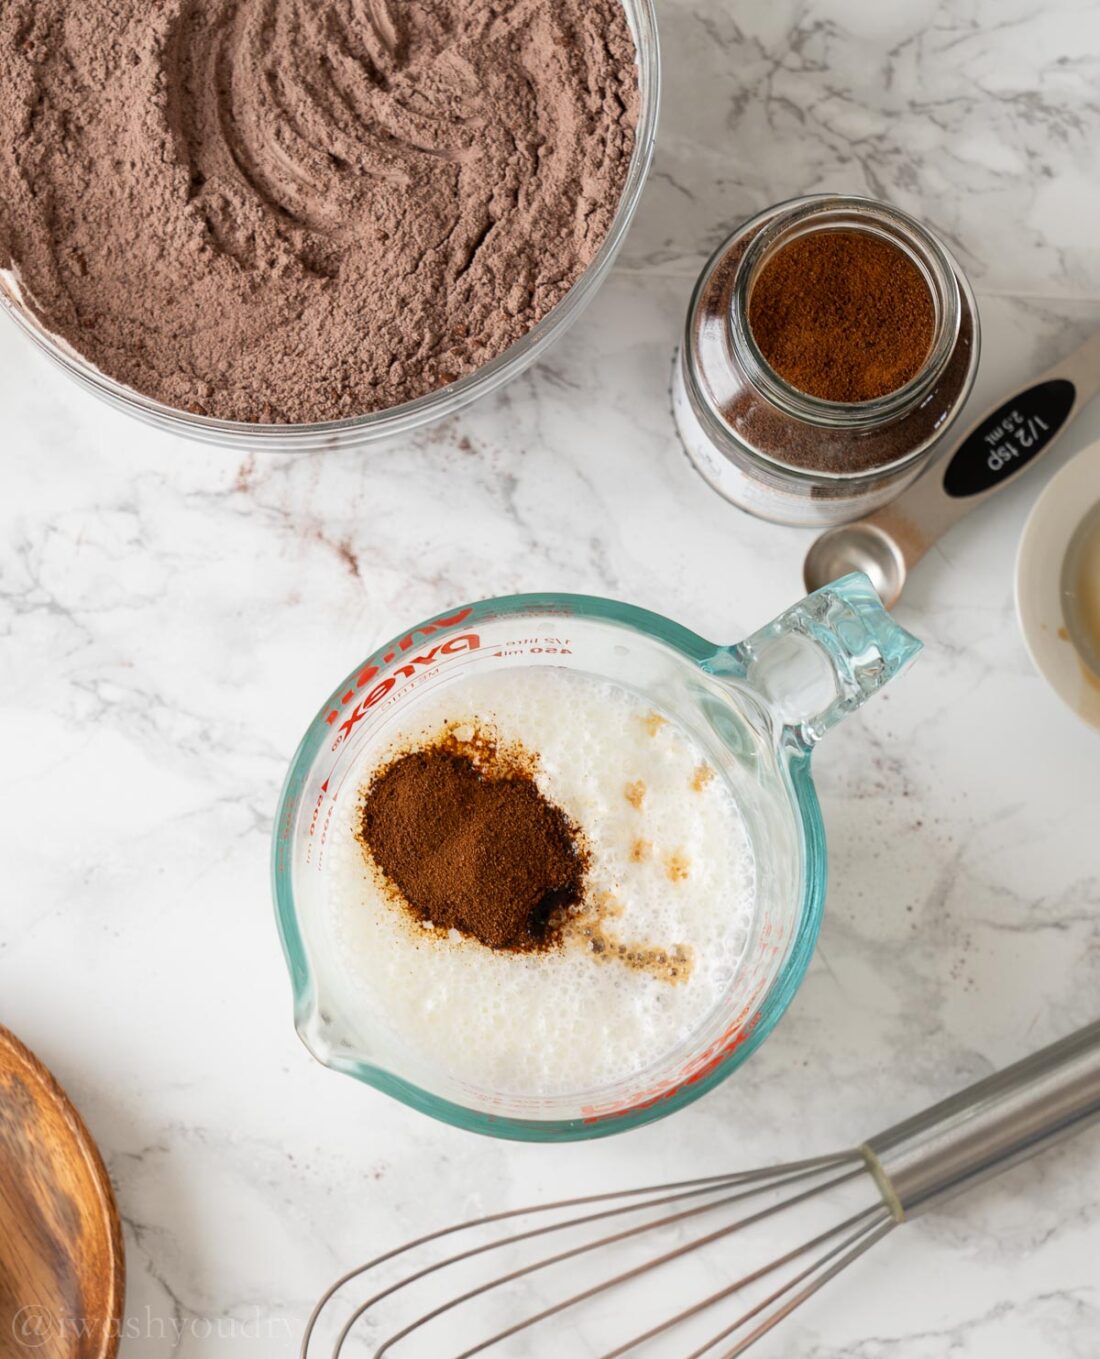 whisking together the buttermilk and espresso powder in a small measuring cup.